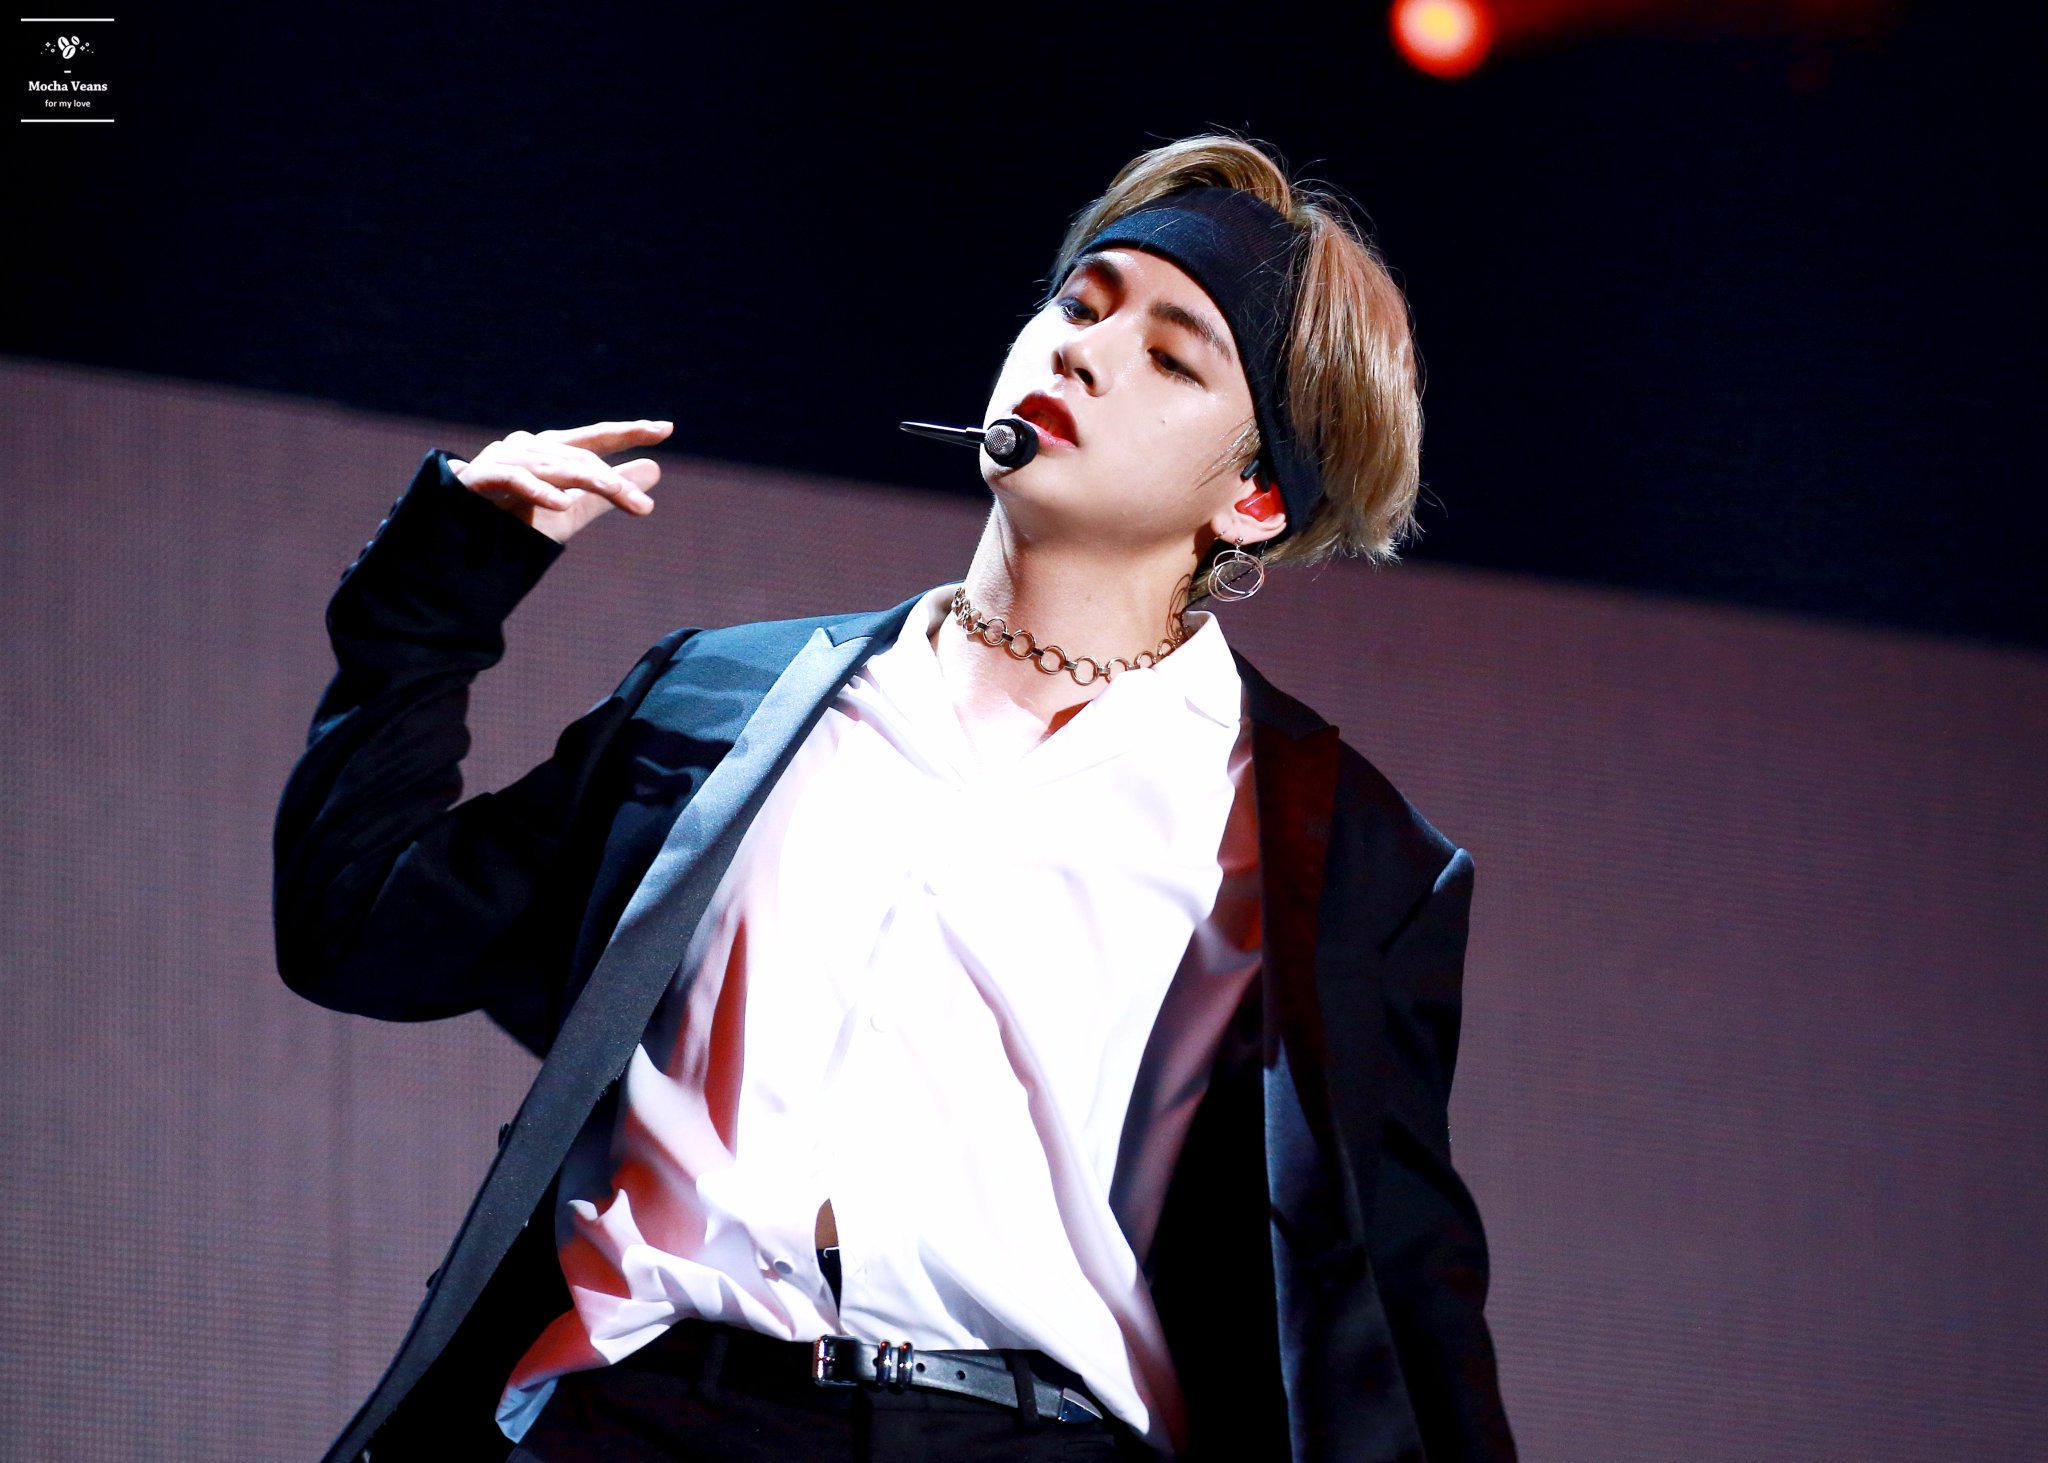 flaskehals skille sig ud hvis ♛ on Twitter: "Currently thinking of Mic drop Taehyung in bandana and suit  https://t.co/8hesjmei3n" / Twitter